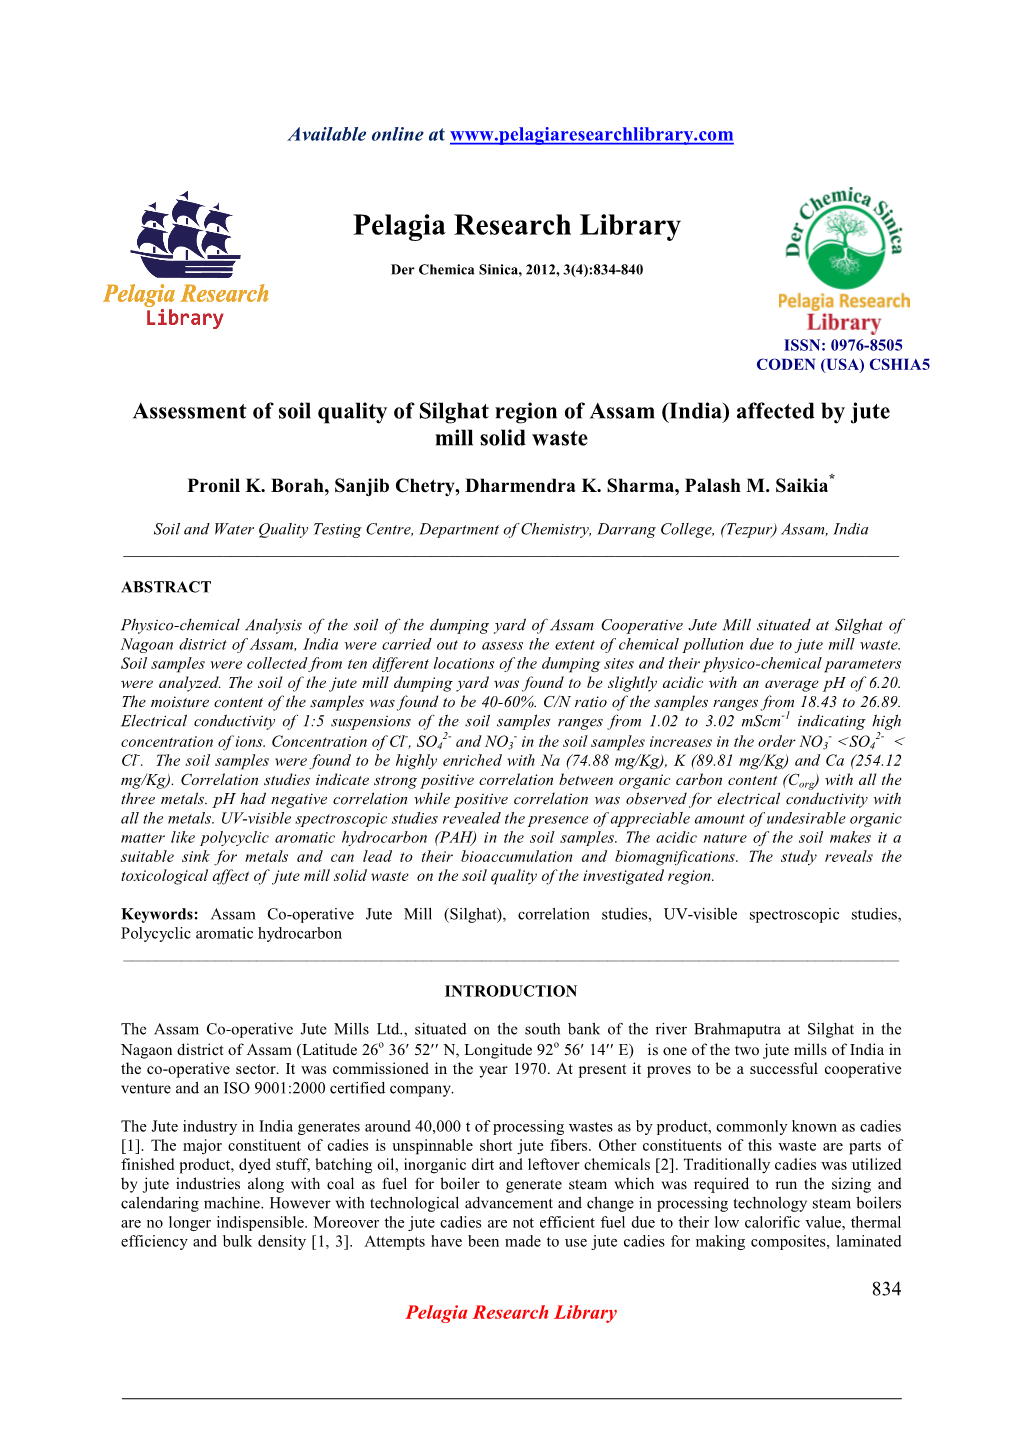 Assessment of Soil Quality of Silghat Region of Assam (India) Affected by Jute Mill Solid Waste